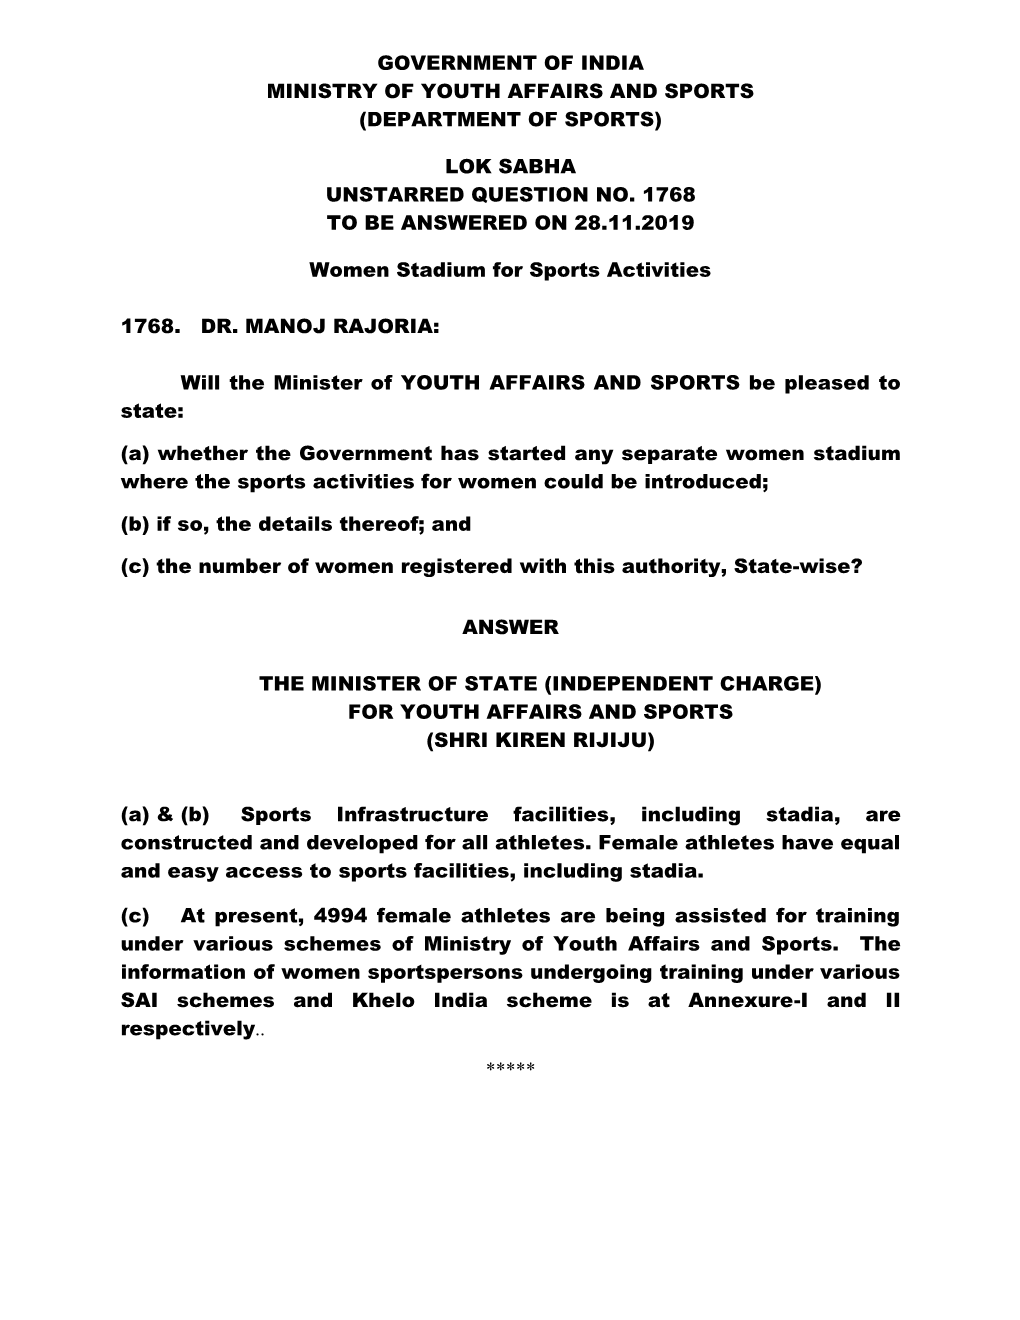 Government of India Ministry of Youth Affairs and Sports (Department of Sports) Lok Sabha Unstarred Question No. 1768 to Be Answ